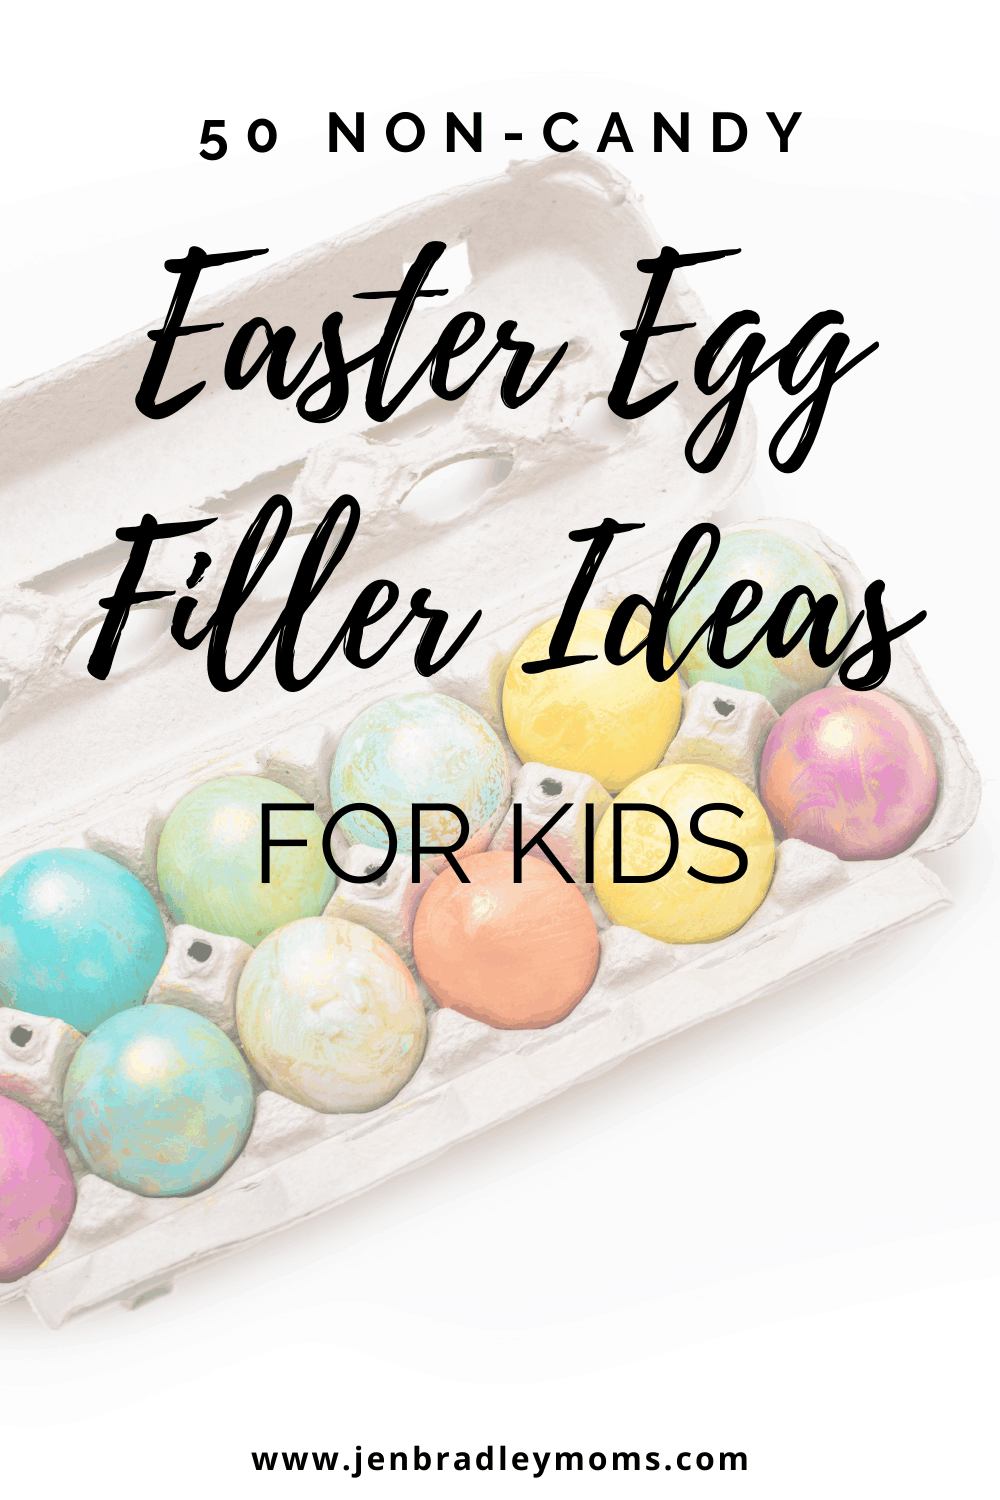 50 Awesome Non-Candy Easter Egg Fillers Your Kids Will Love